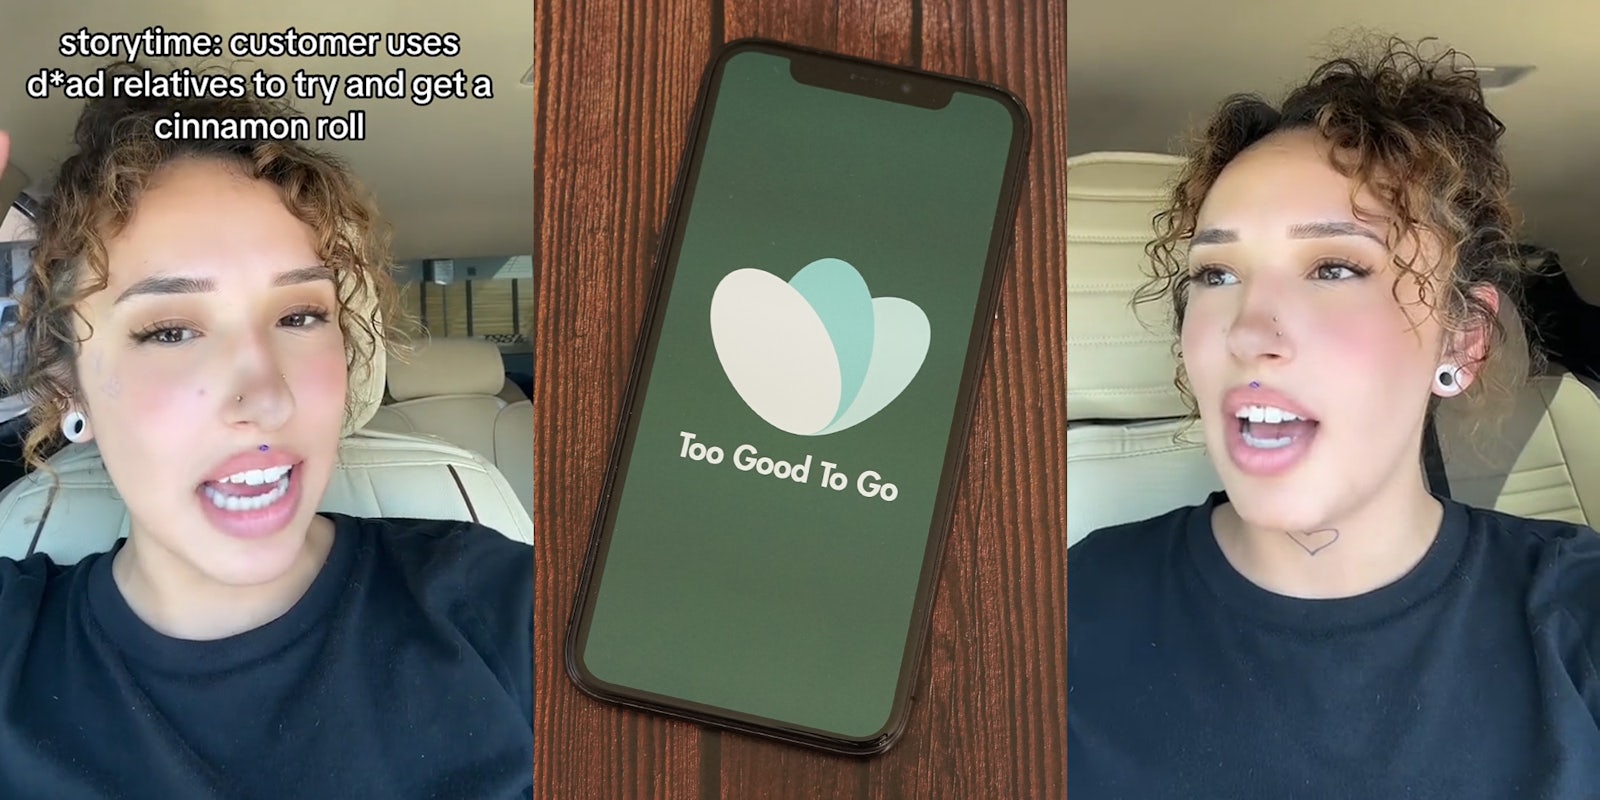 worker speaking in car with caption 'storytime: customer uses d*ad relatives to try to get a cinnamon roll' (l) Too Good To Go app opening on phone in front of wooden background (c) worker speaking in car (r)